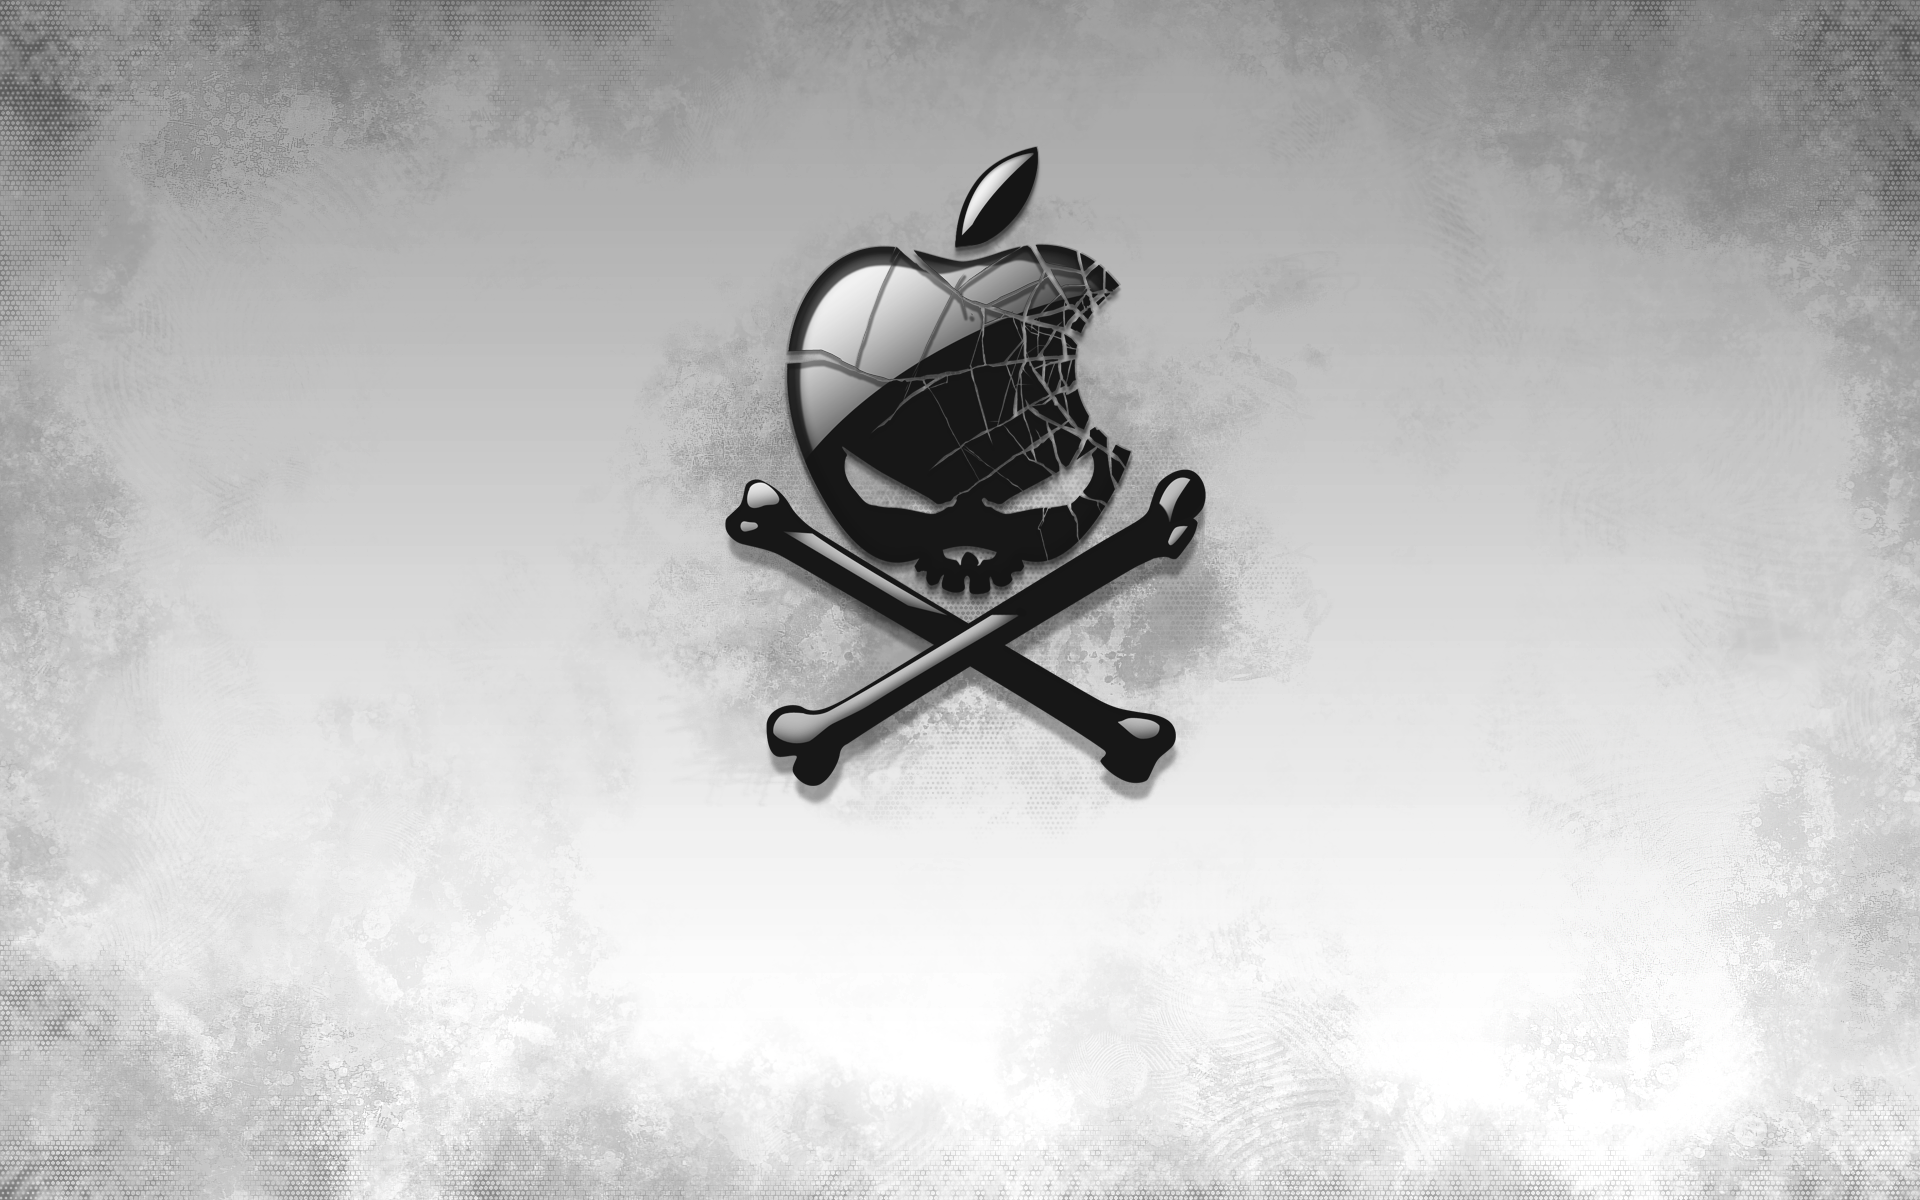 Apple Logo Space Wallpapers | HD Wallpapers Free HD Wallpapers ...